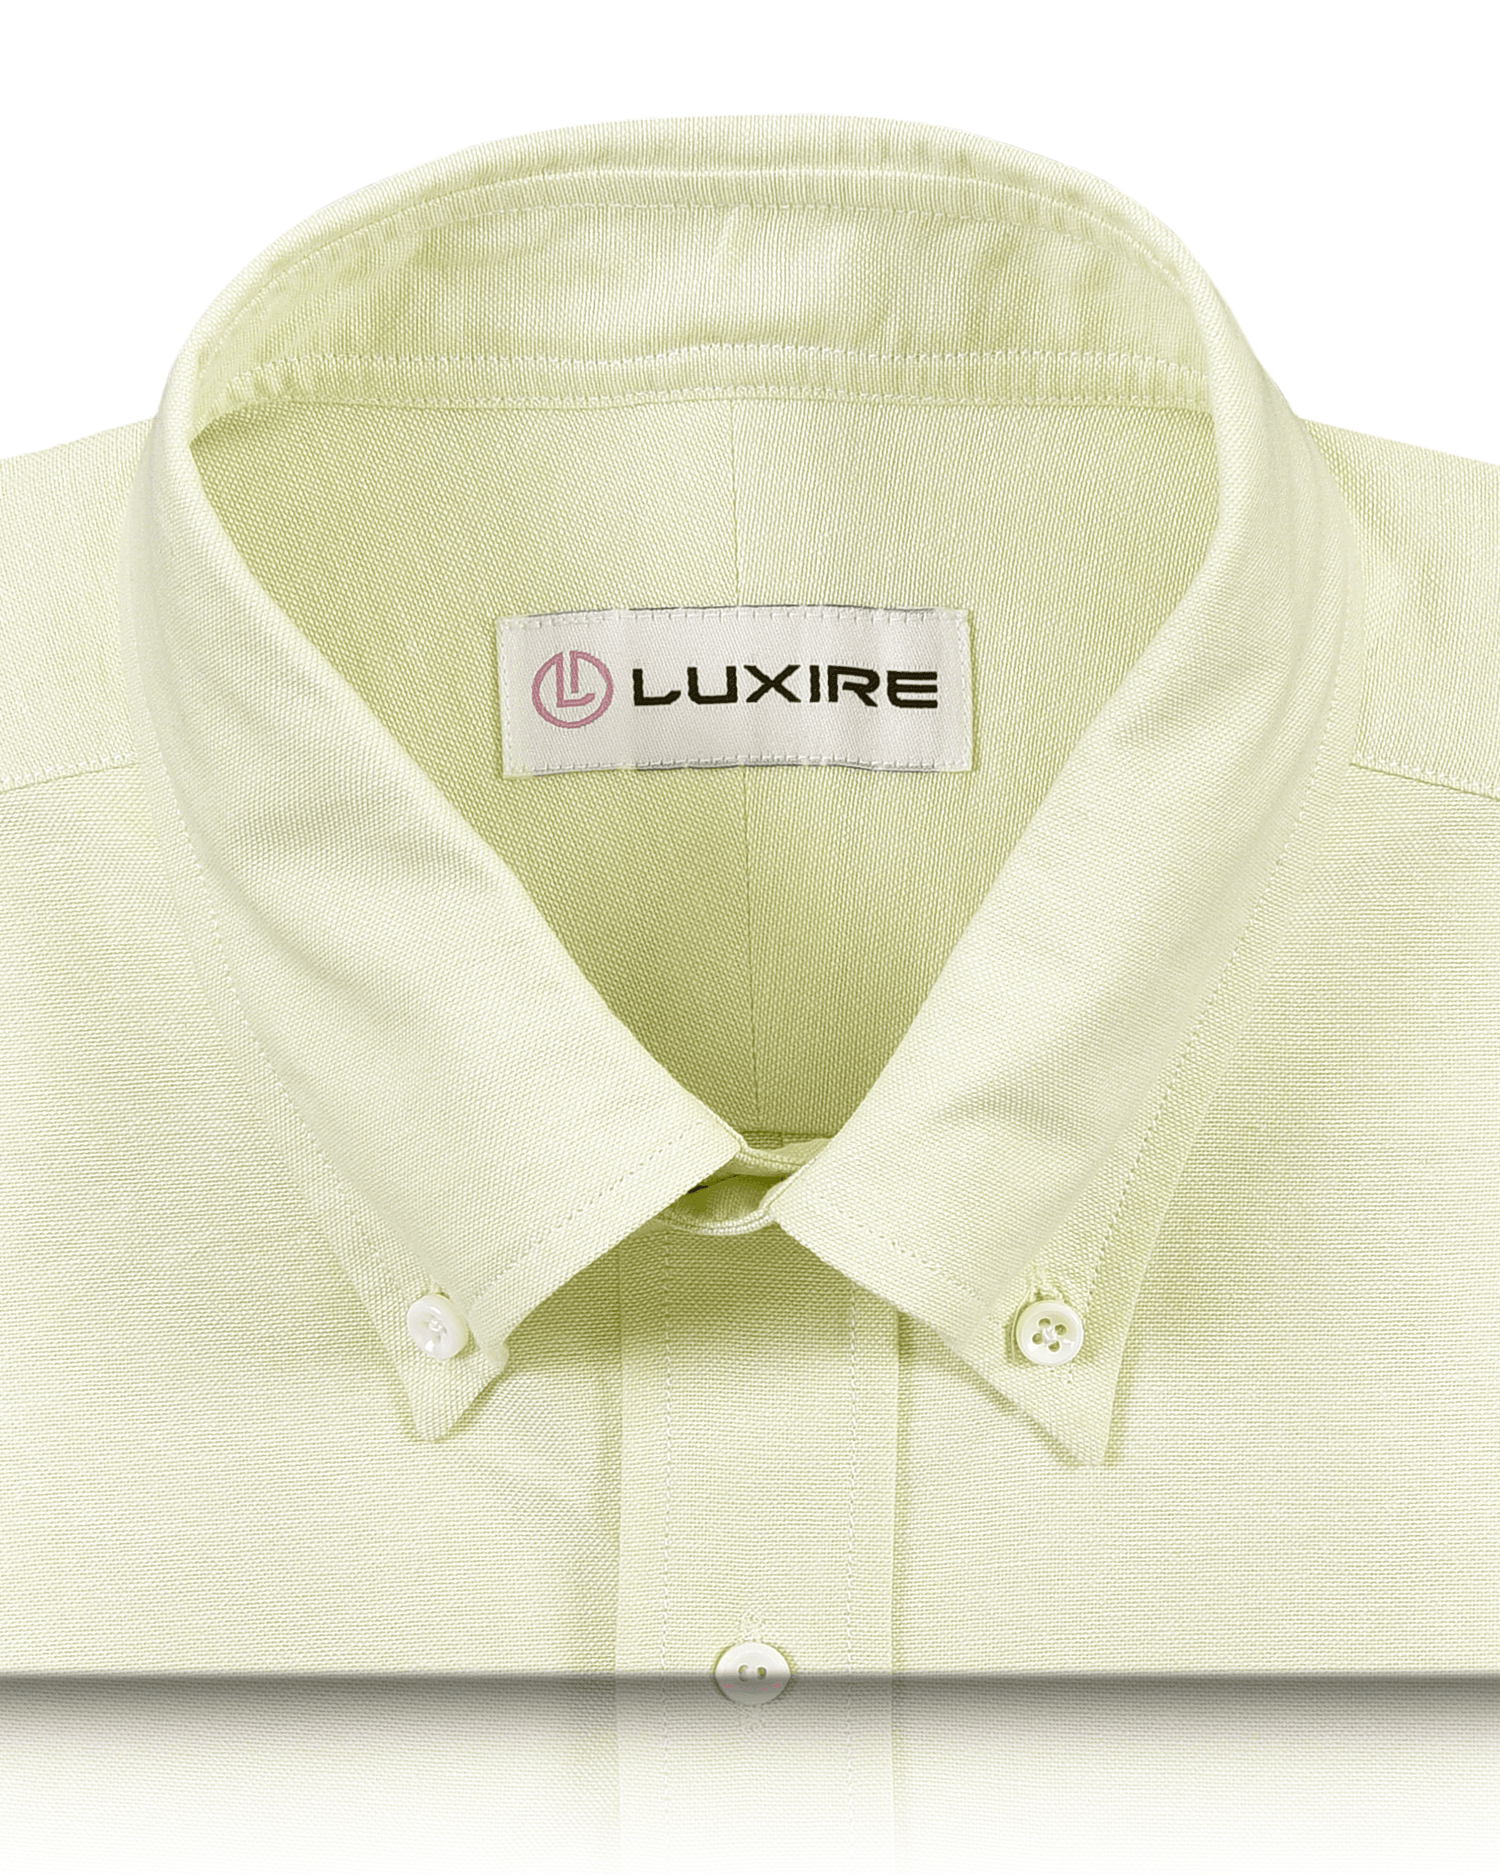 Collar of the custom oxford shirt for men by Luxire in pale green